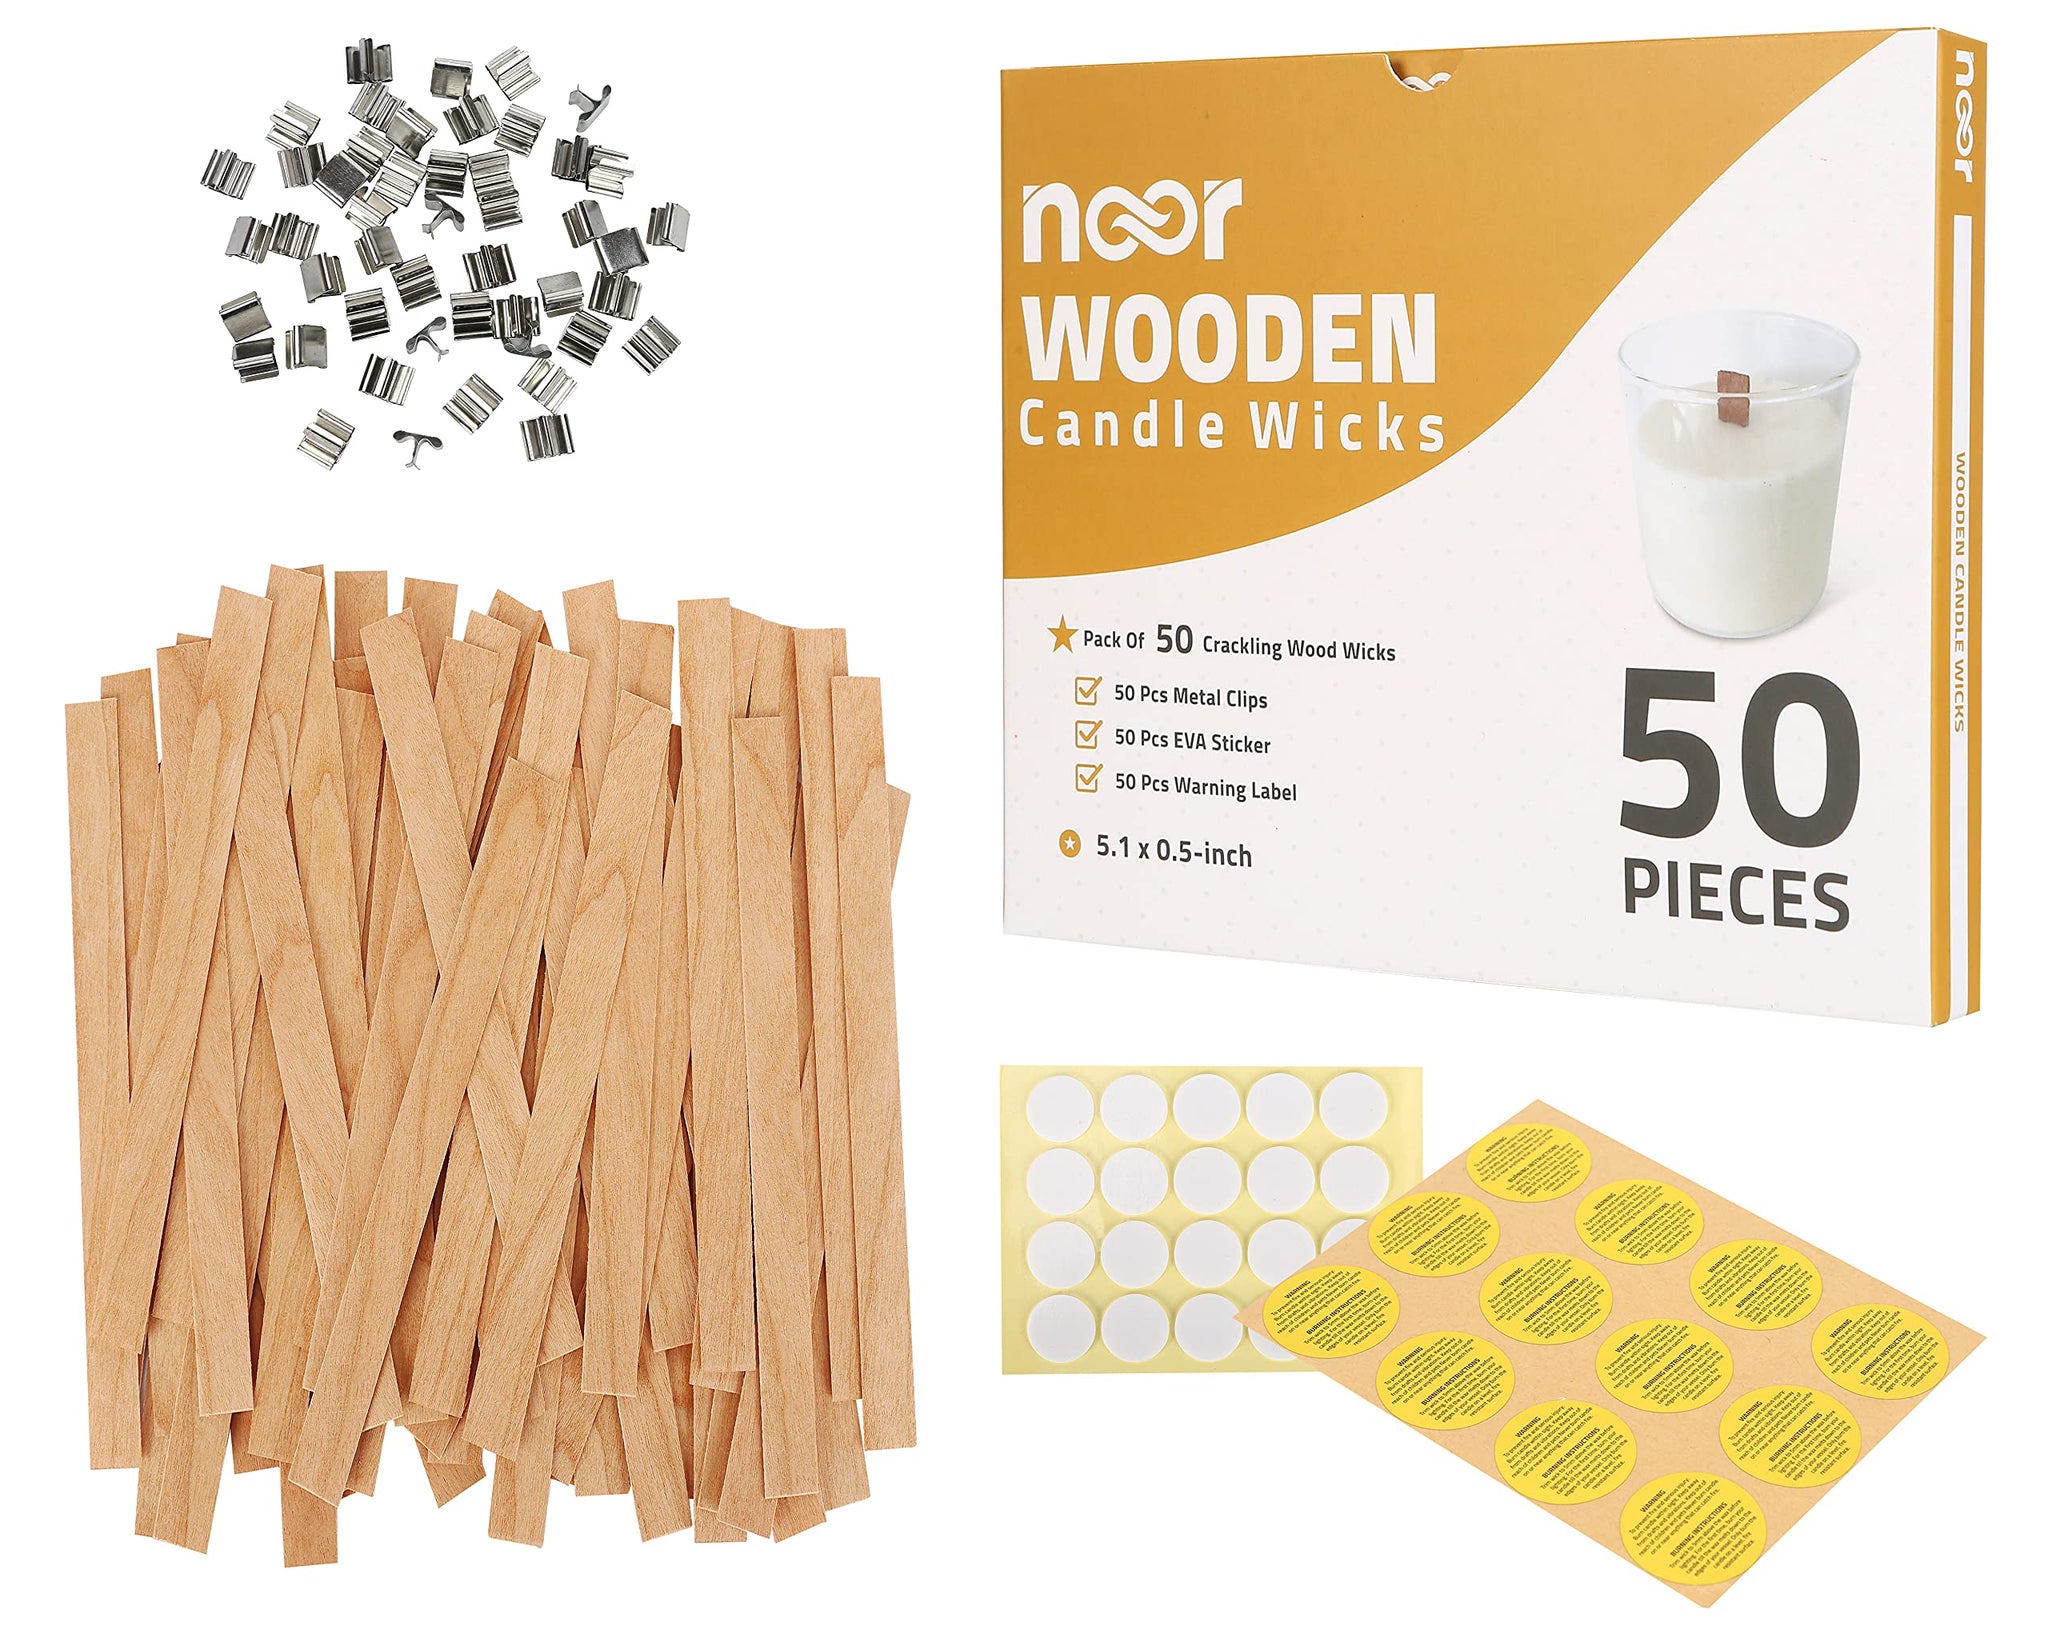 330pcs Wooden Candle Wicks Set With Metal Base Warning Labels